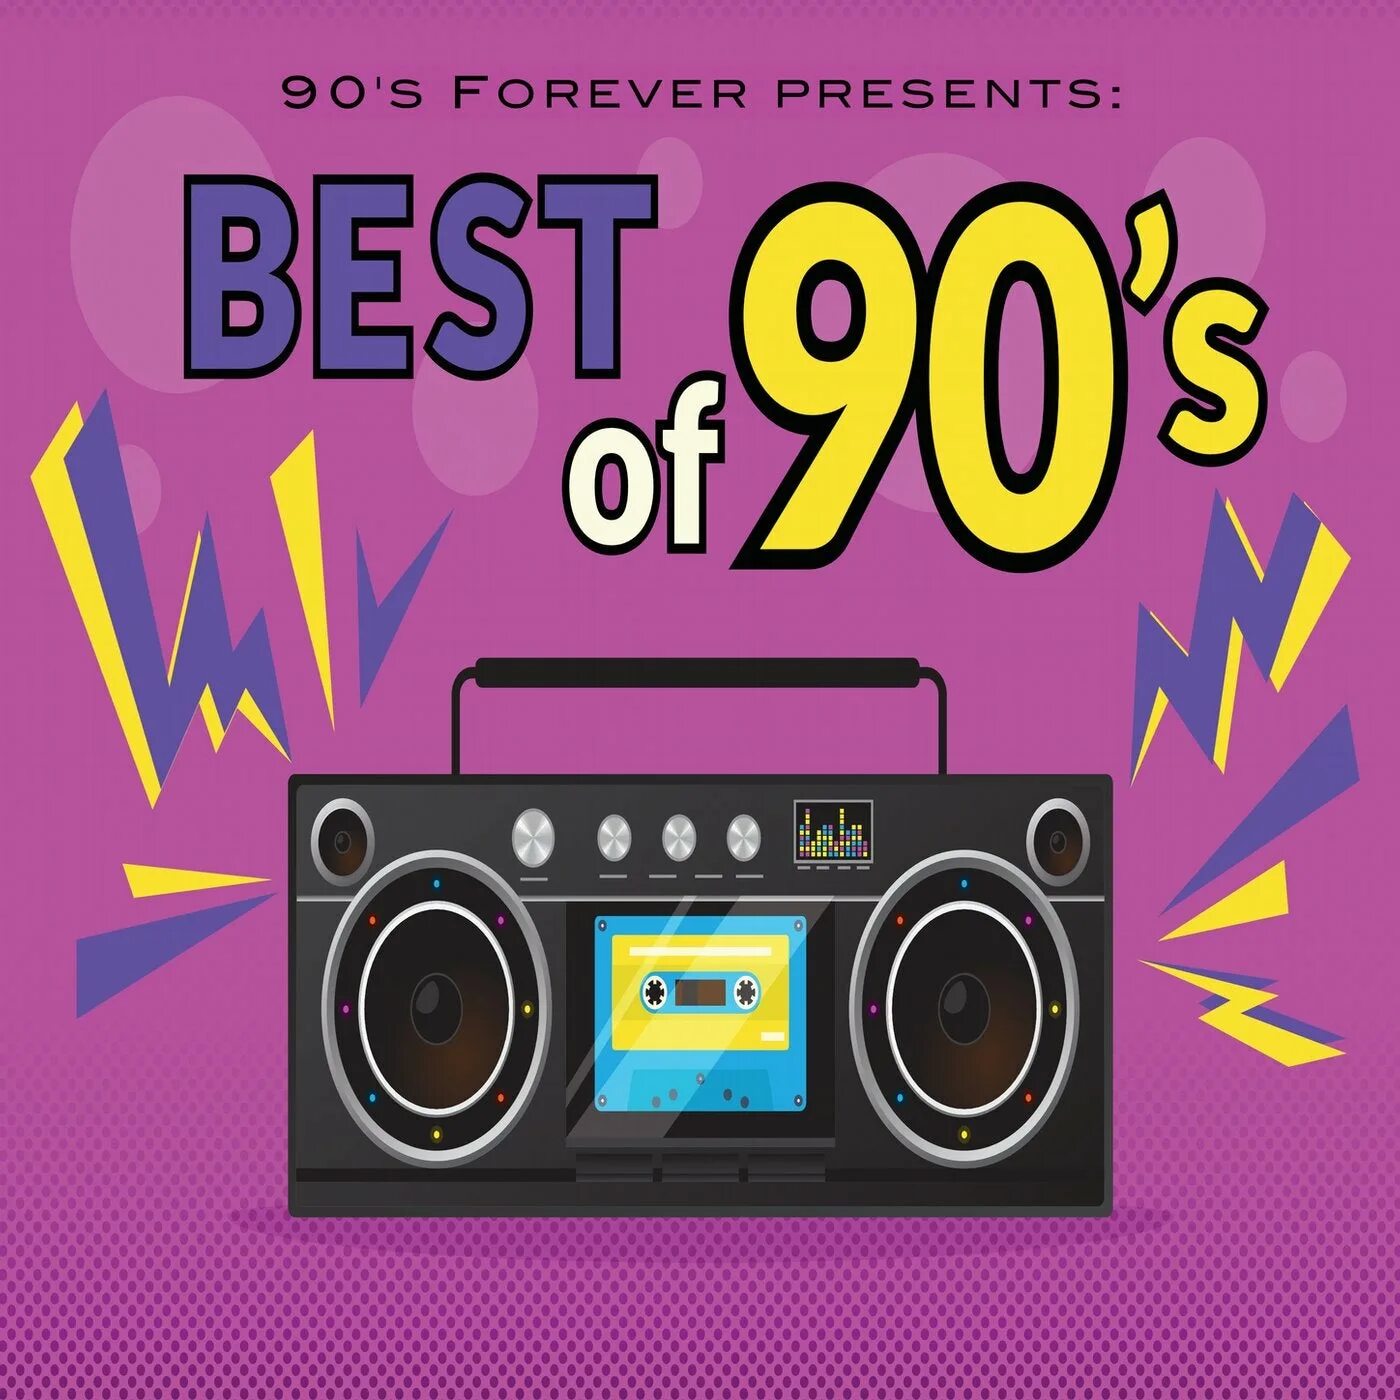 Best Hits 90. The best Hits of 90's сборник. The best Hits of 90's диск. Dance Hits of the 90s. Hits 90 s